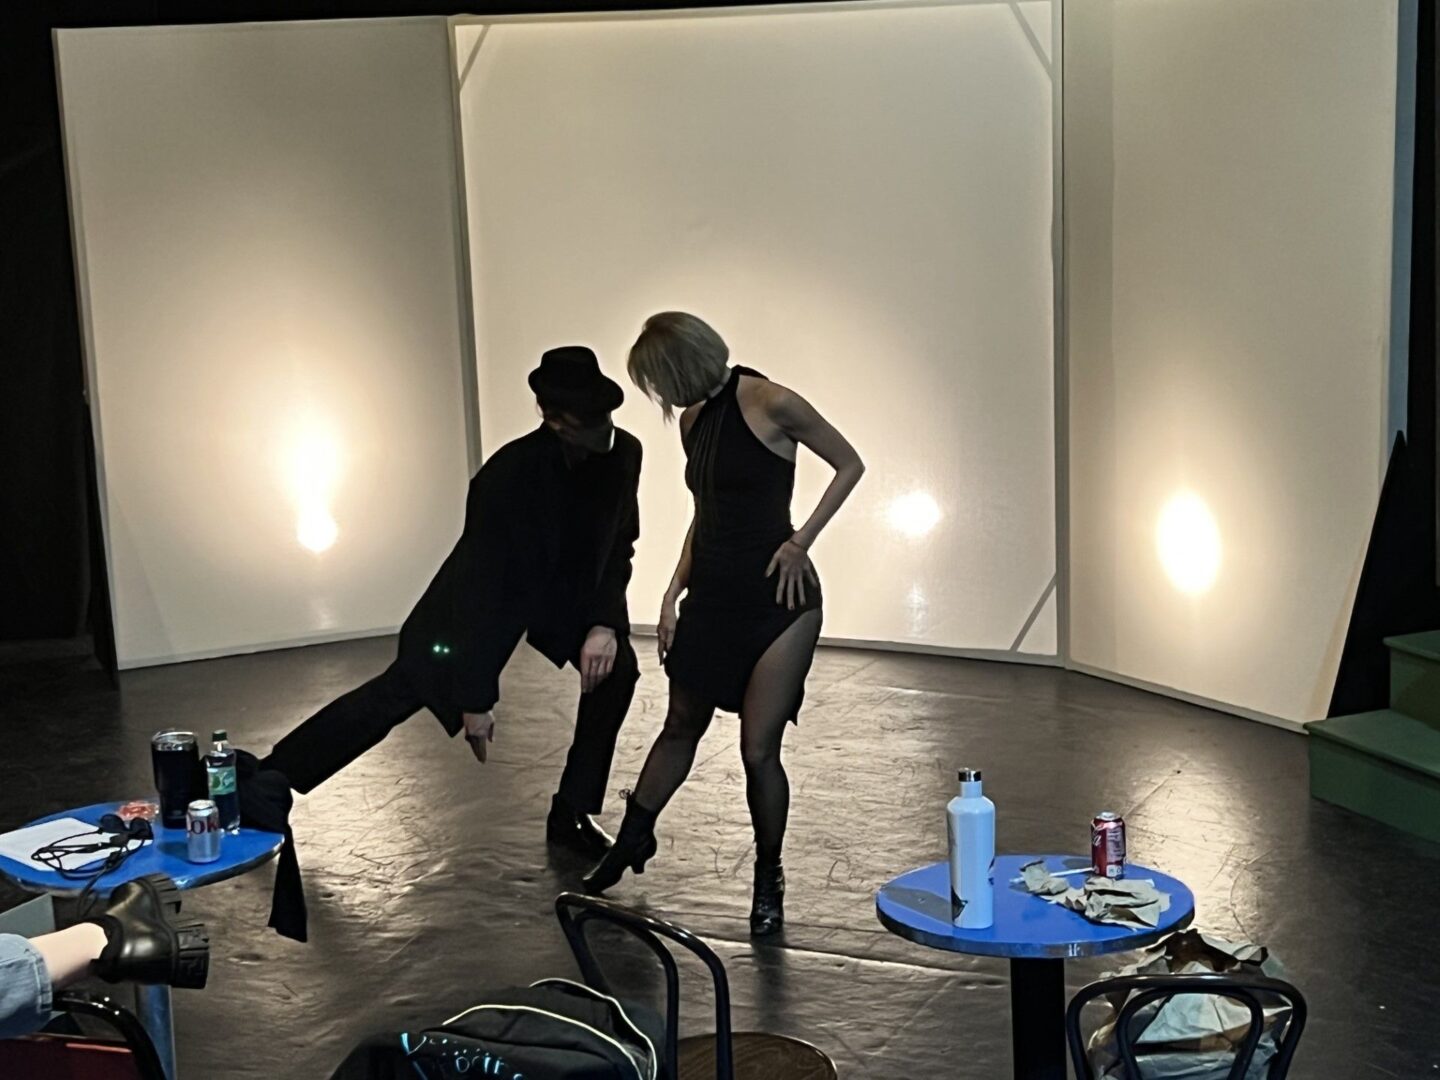 A man and a woman dancing in a studio